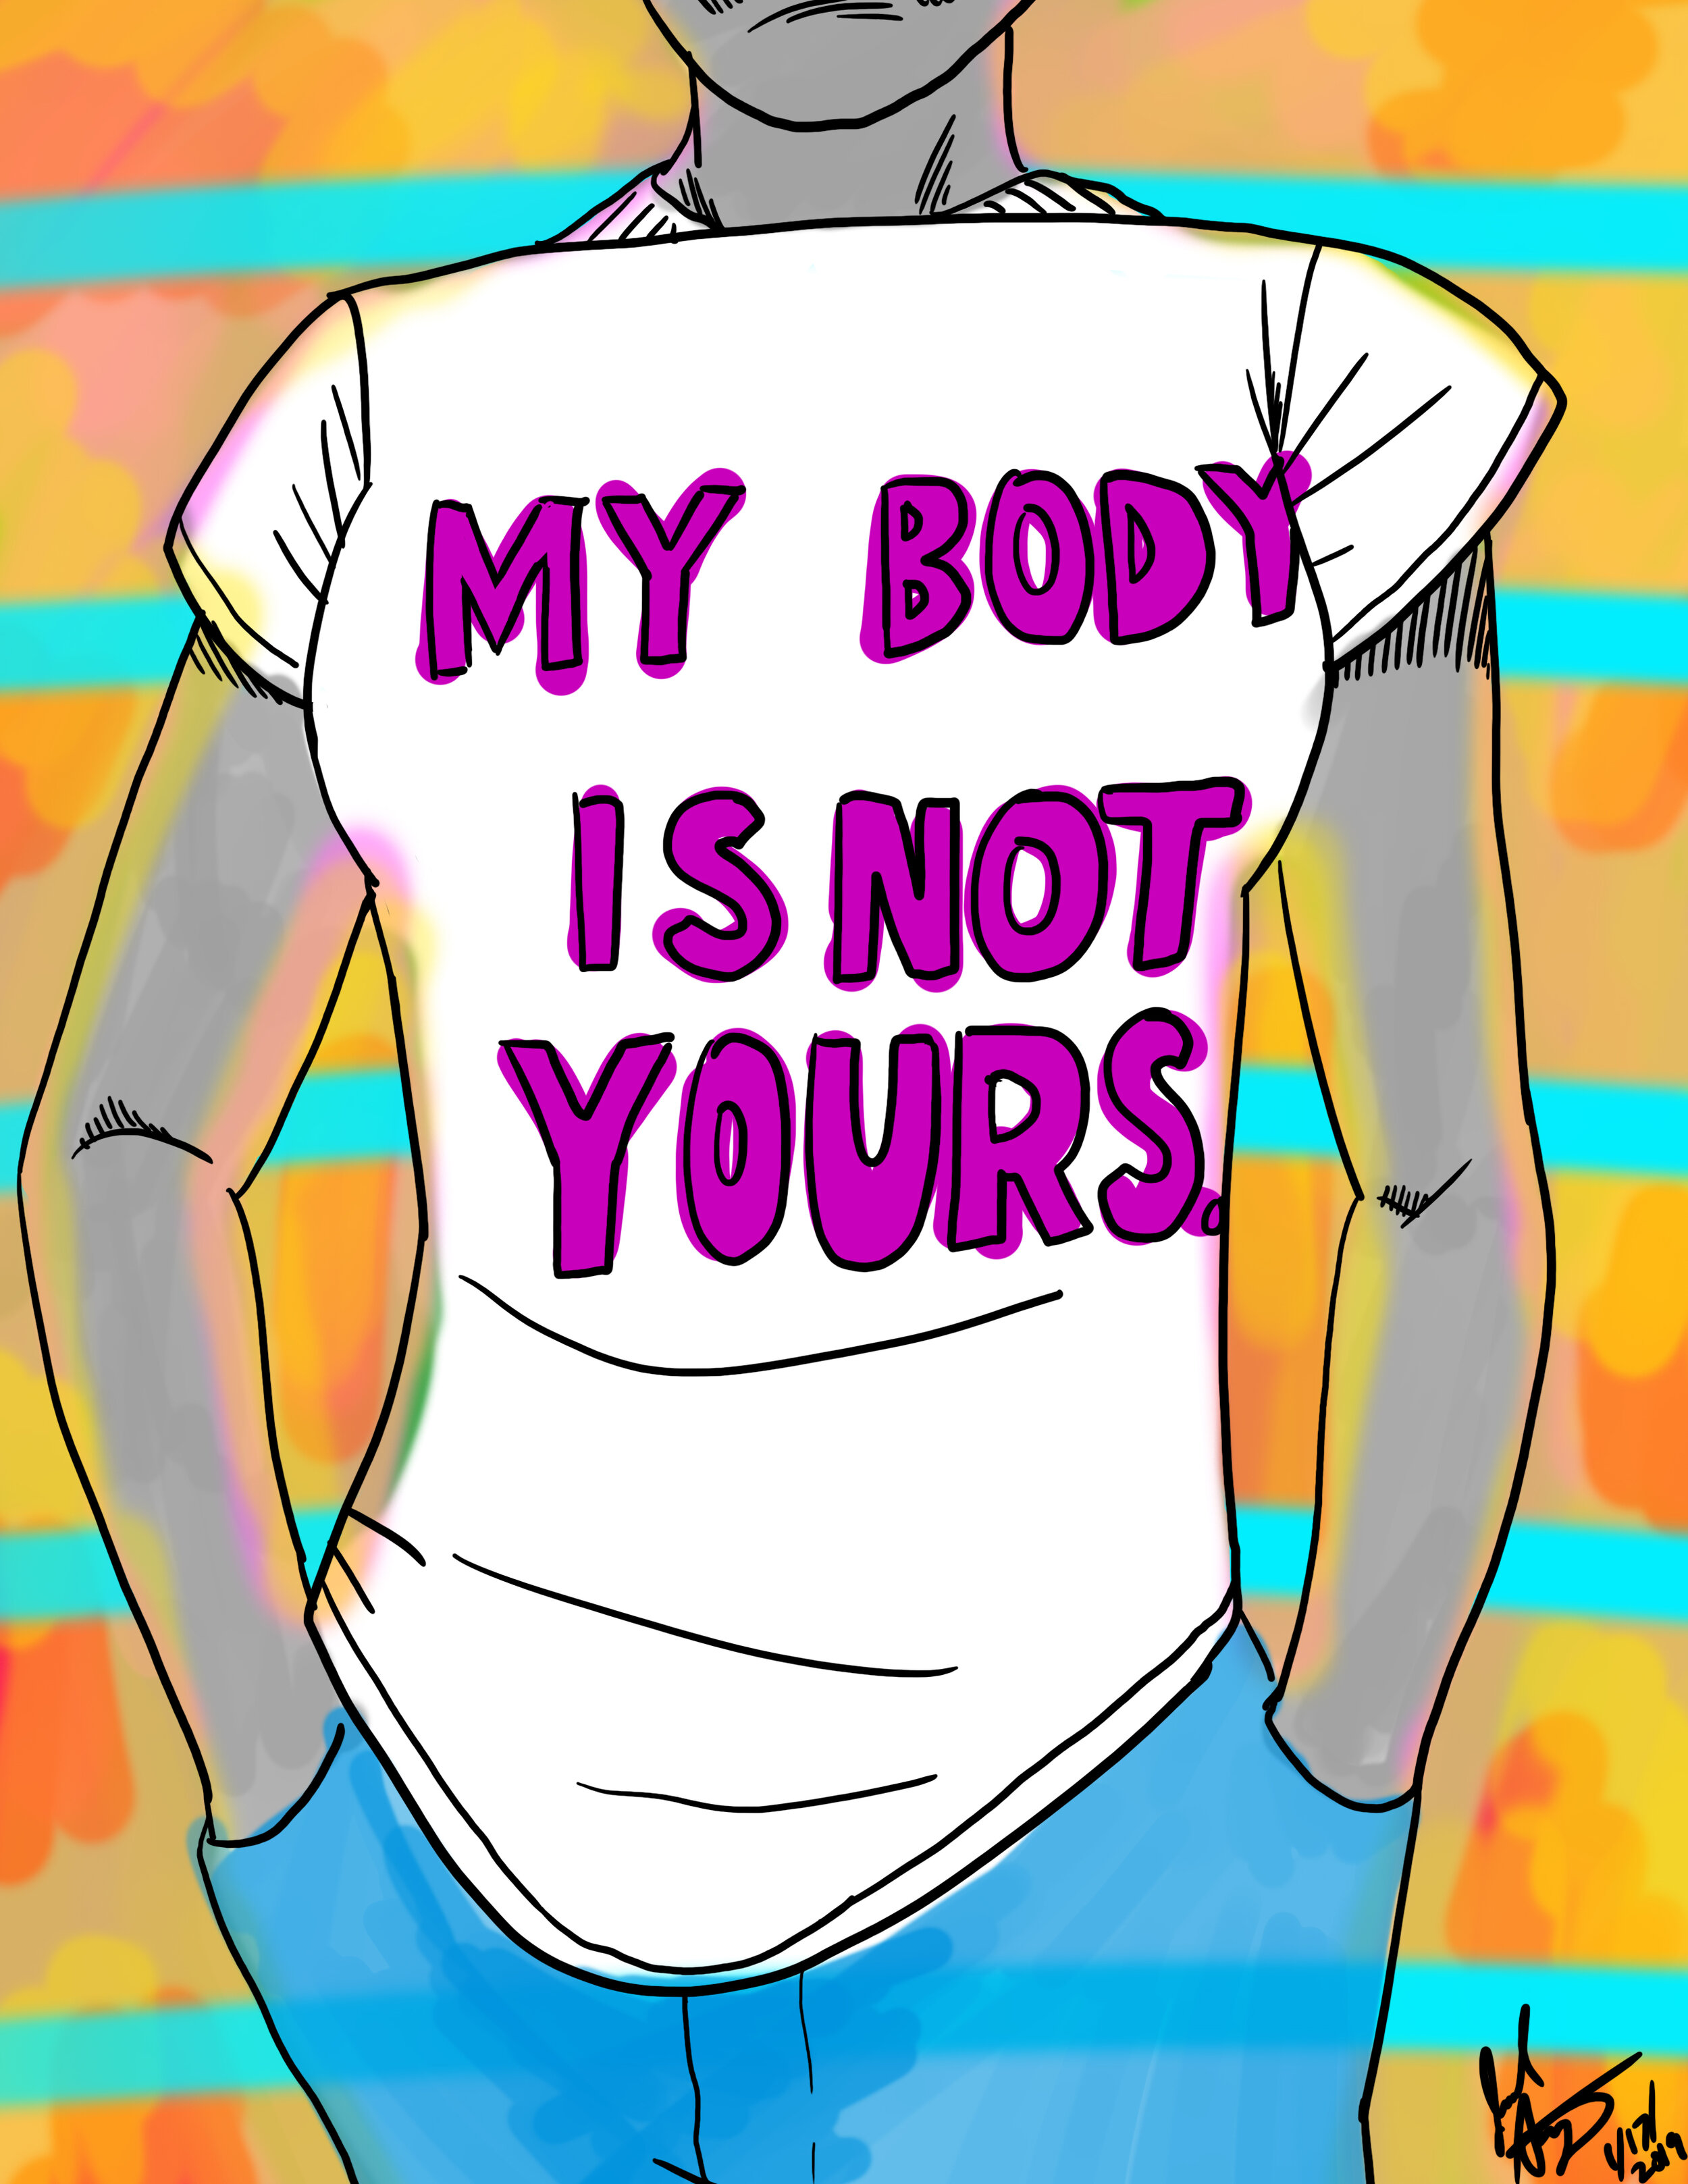  My Body is Not Yours.  Featured at  New Profanity ,  Art Unified , and  Page Against the Machine . Originally created to showcase the most important message of MeToo, but now used to apply to all sorts of “controversies”. Often used as Street Art. 